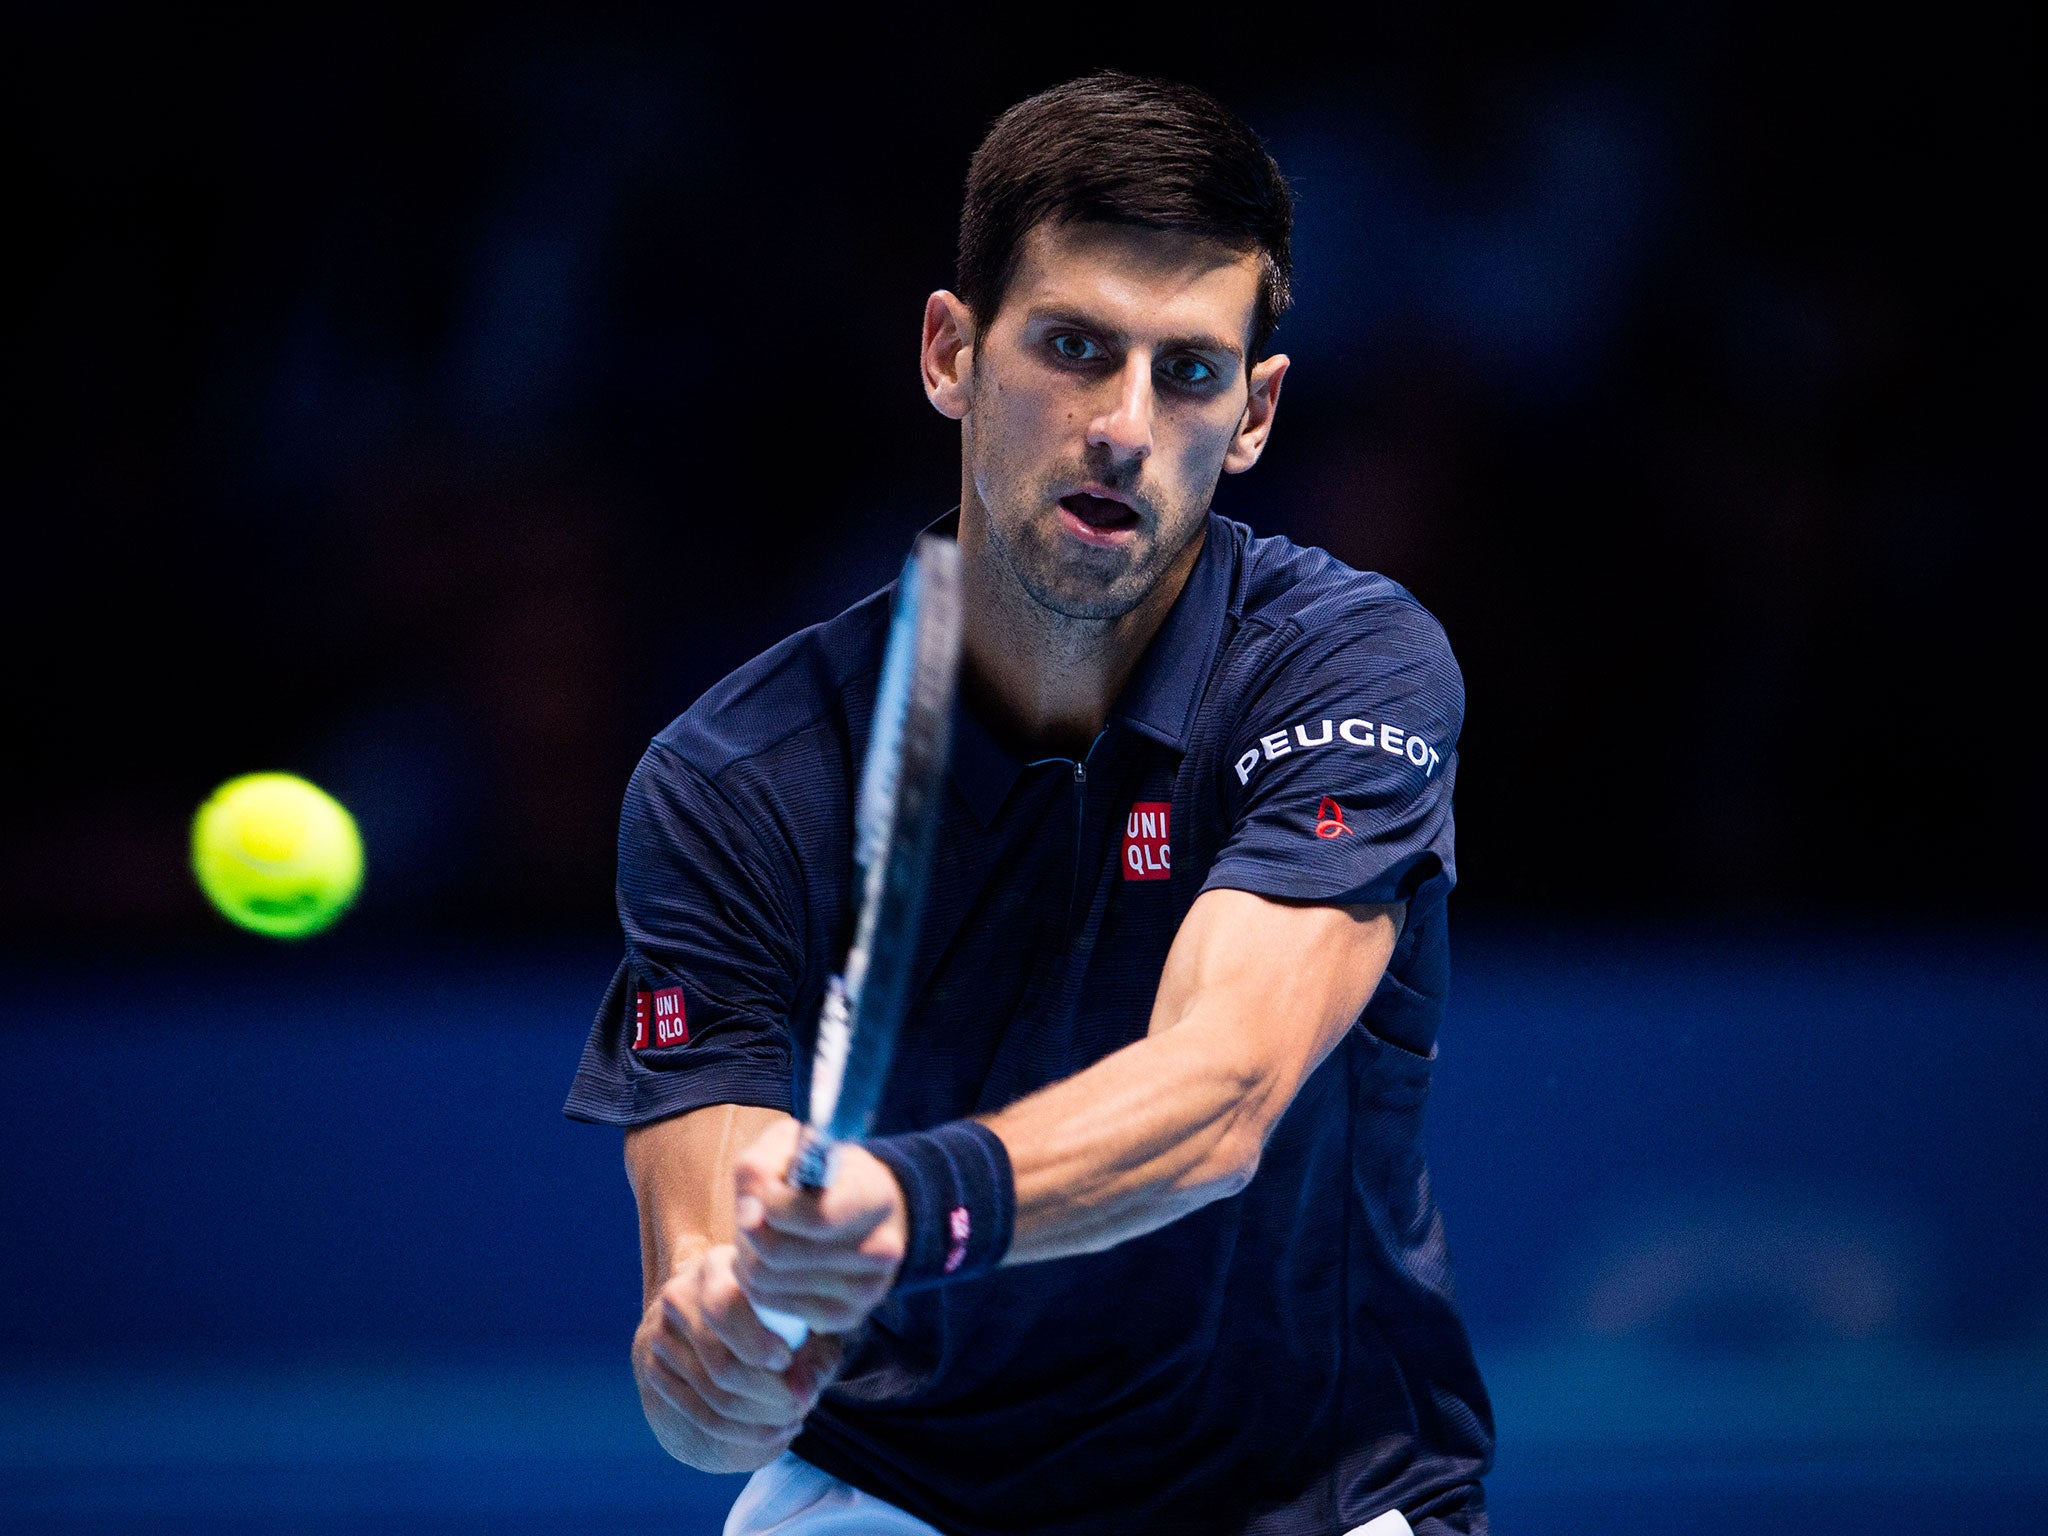 Djokovic has already booked his place in the semi-finals